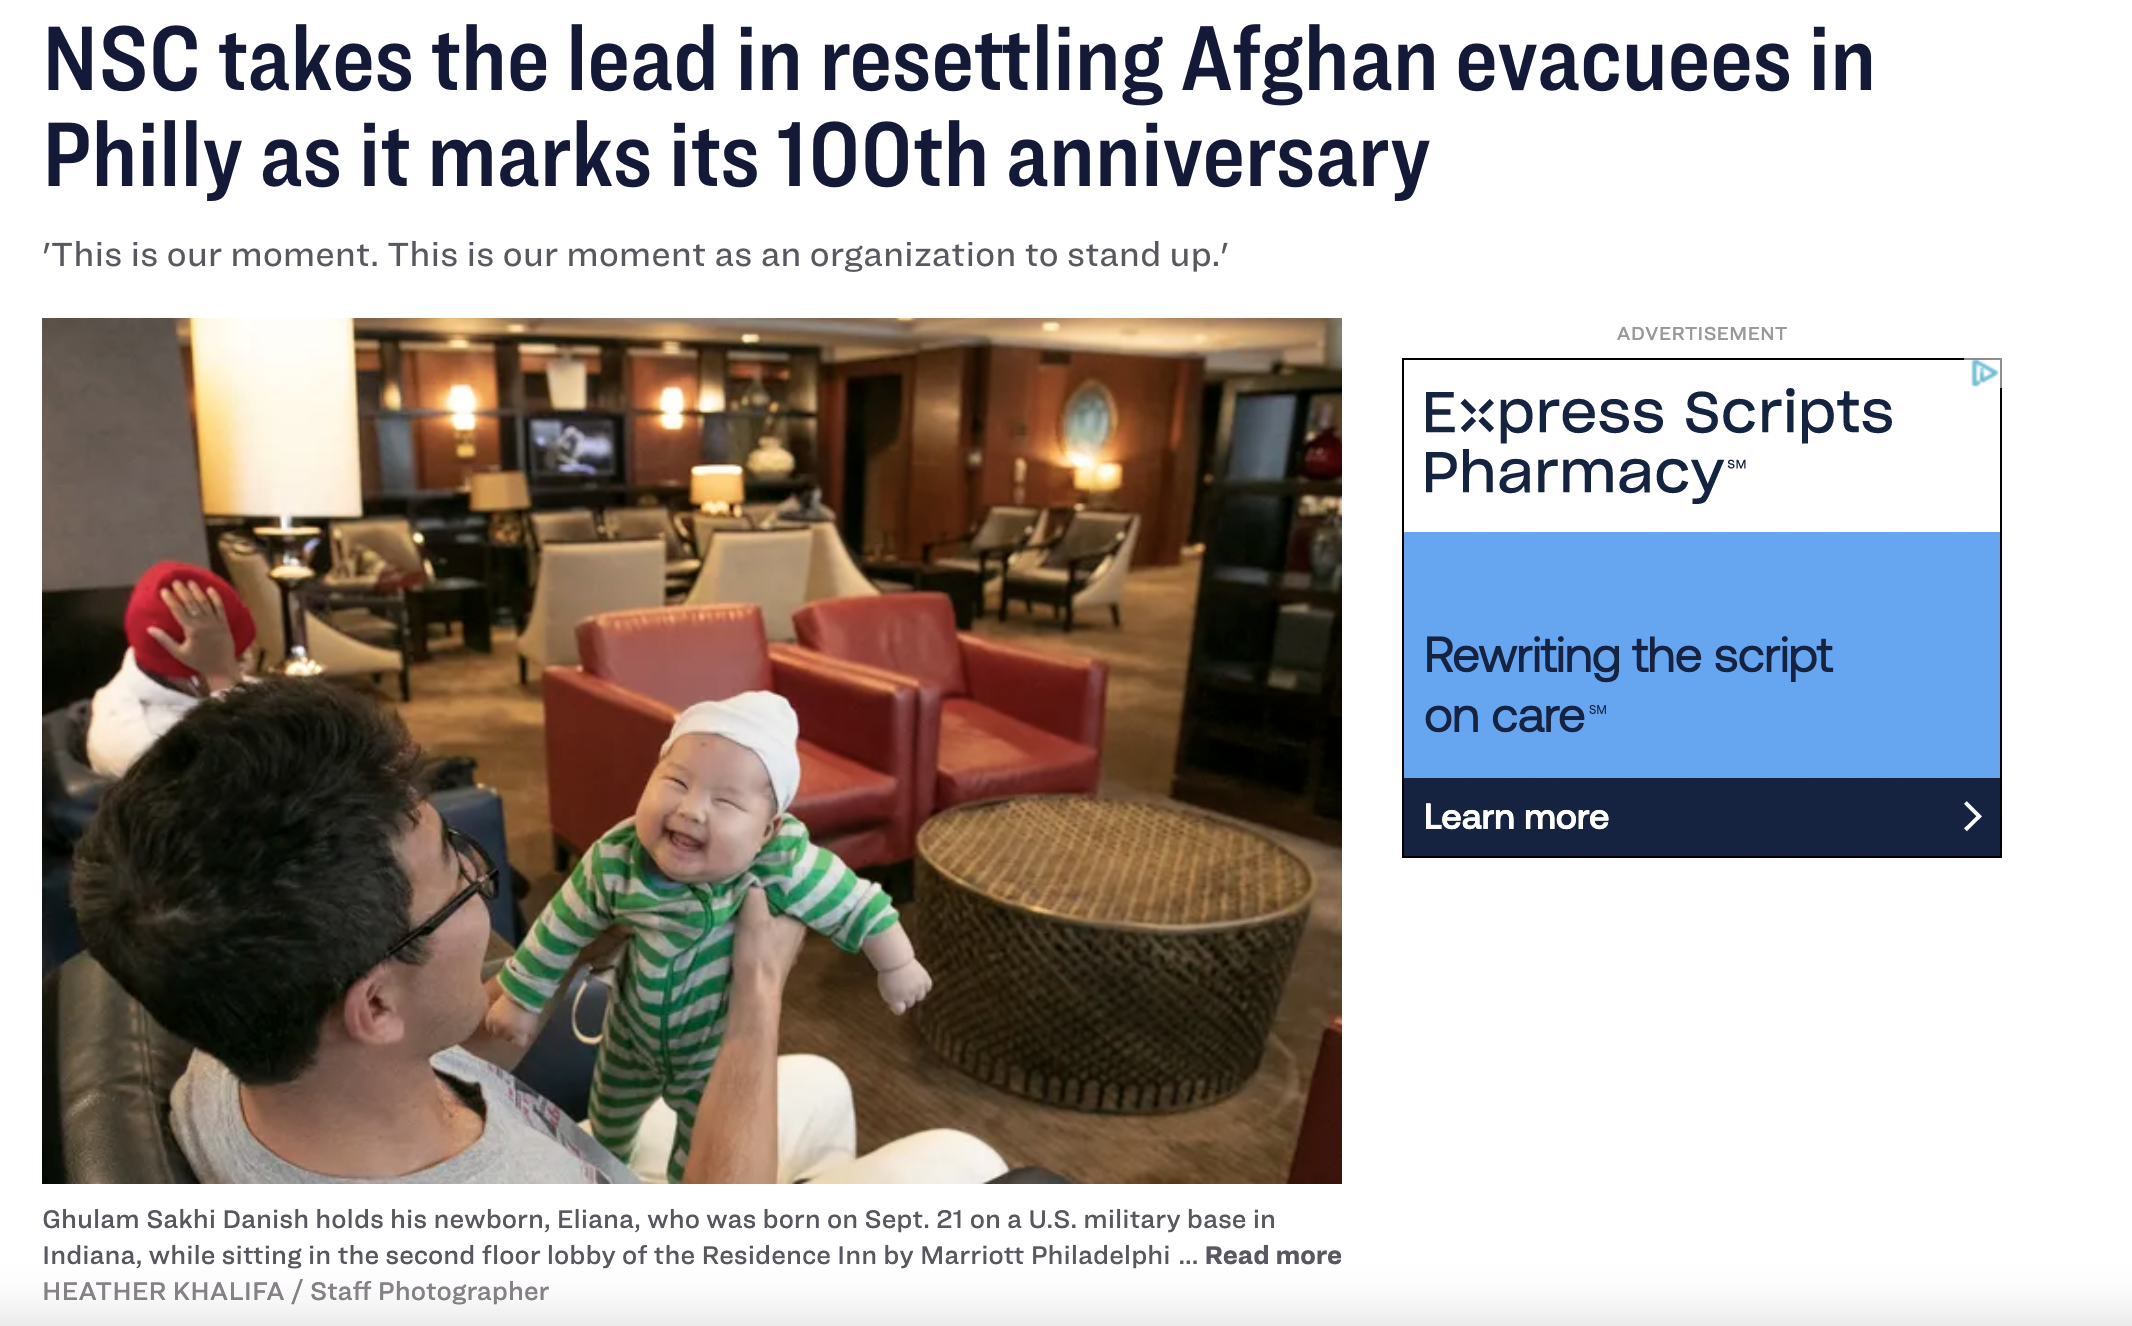 A screen shot of an article titled "NSC takes the lead in resettling Afghan evacuees in Philly as it marks its 100th anniversary"